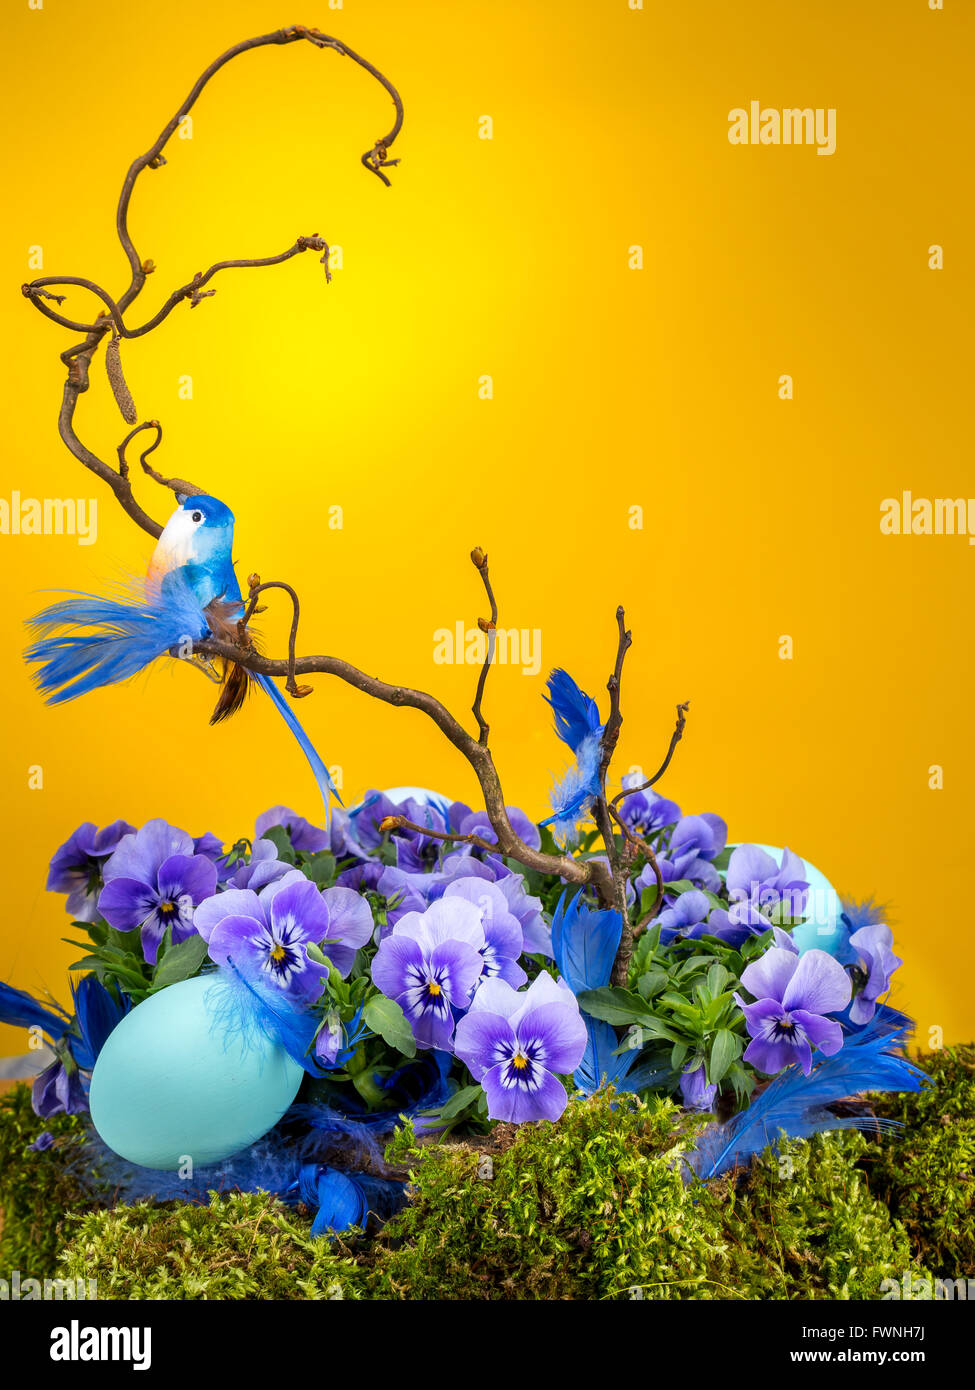 Easter composition with blue bird sitting on tree branch with violet flowers end blue egg shot on yellow background Stock Photo